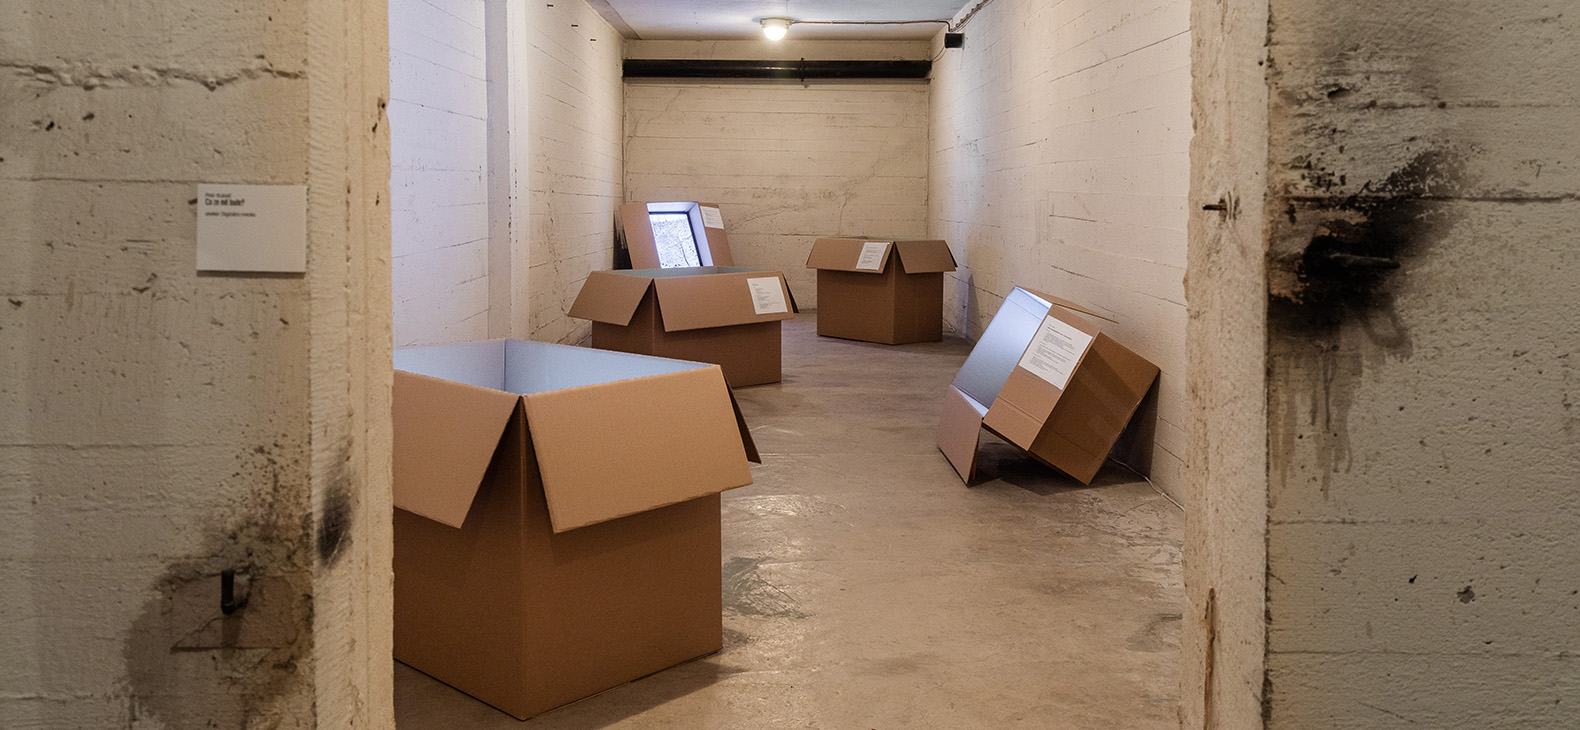 Artist-in-Residence: Petr Kubáč; Focus > Usti nad Labem, stay at Schafhof August - September 2023: Image: Petr Kubáč - When grow up, 2023. A view of an installation of cardboard boxes with monitors inside in a room of an abandoned building.